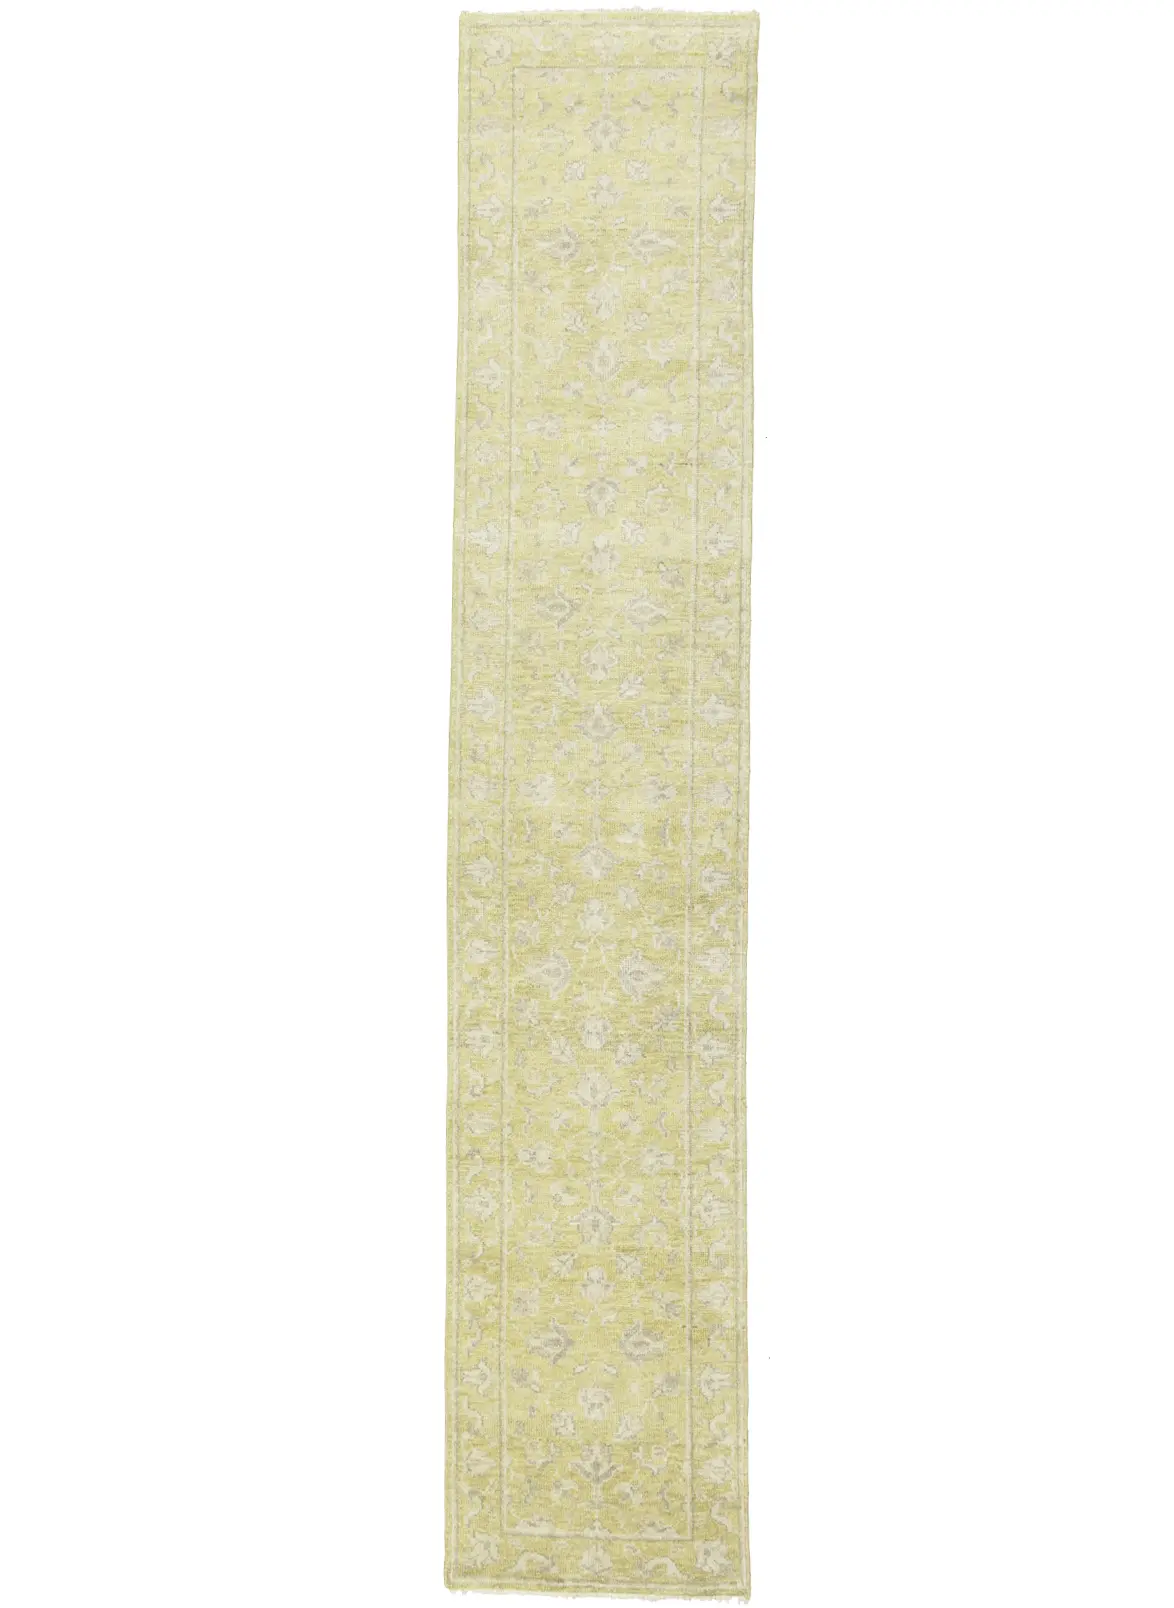 Muted Golden Yellow Floral 3X14 Transitional Oriental Runner Rug